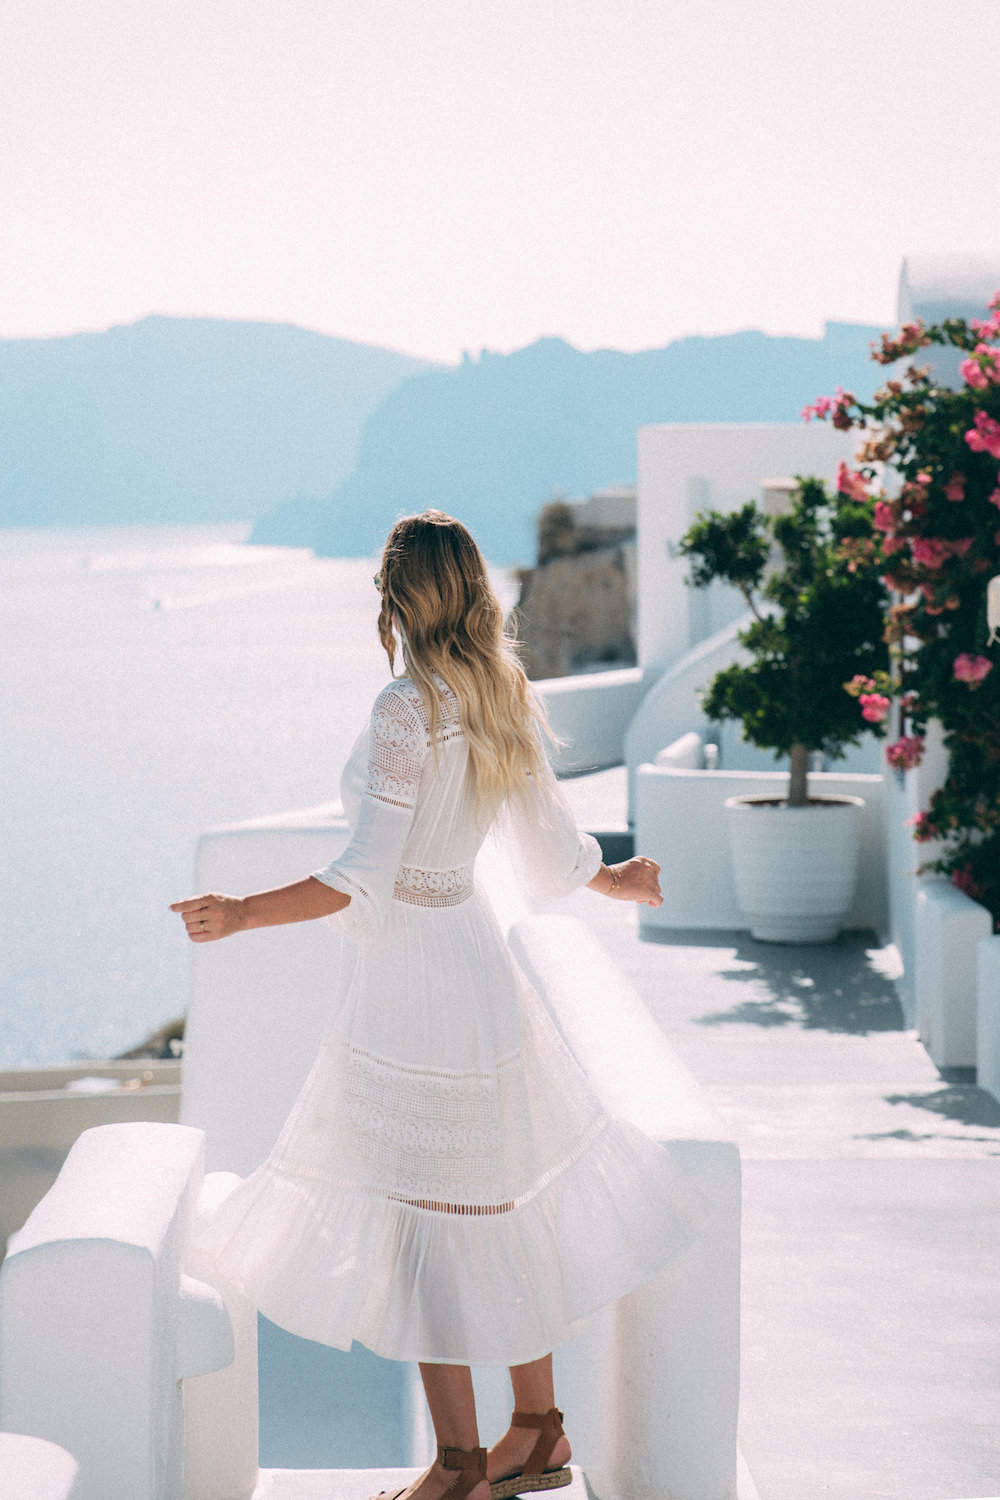 Dash of Darling shares her travels from Oia, Santorini Greece with Royal Caribbean Cruises while wearing a white Spell Designs dress.